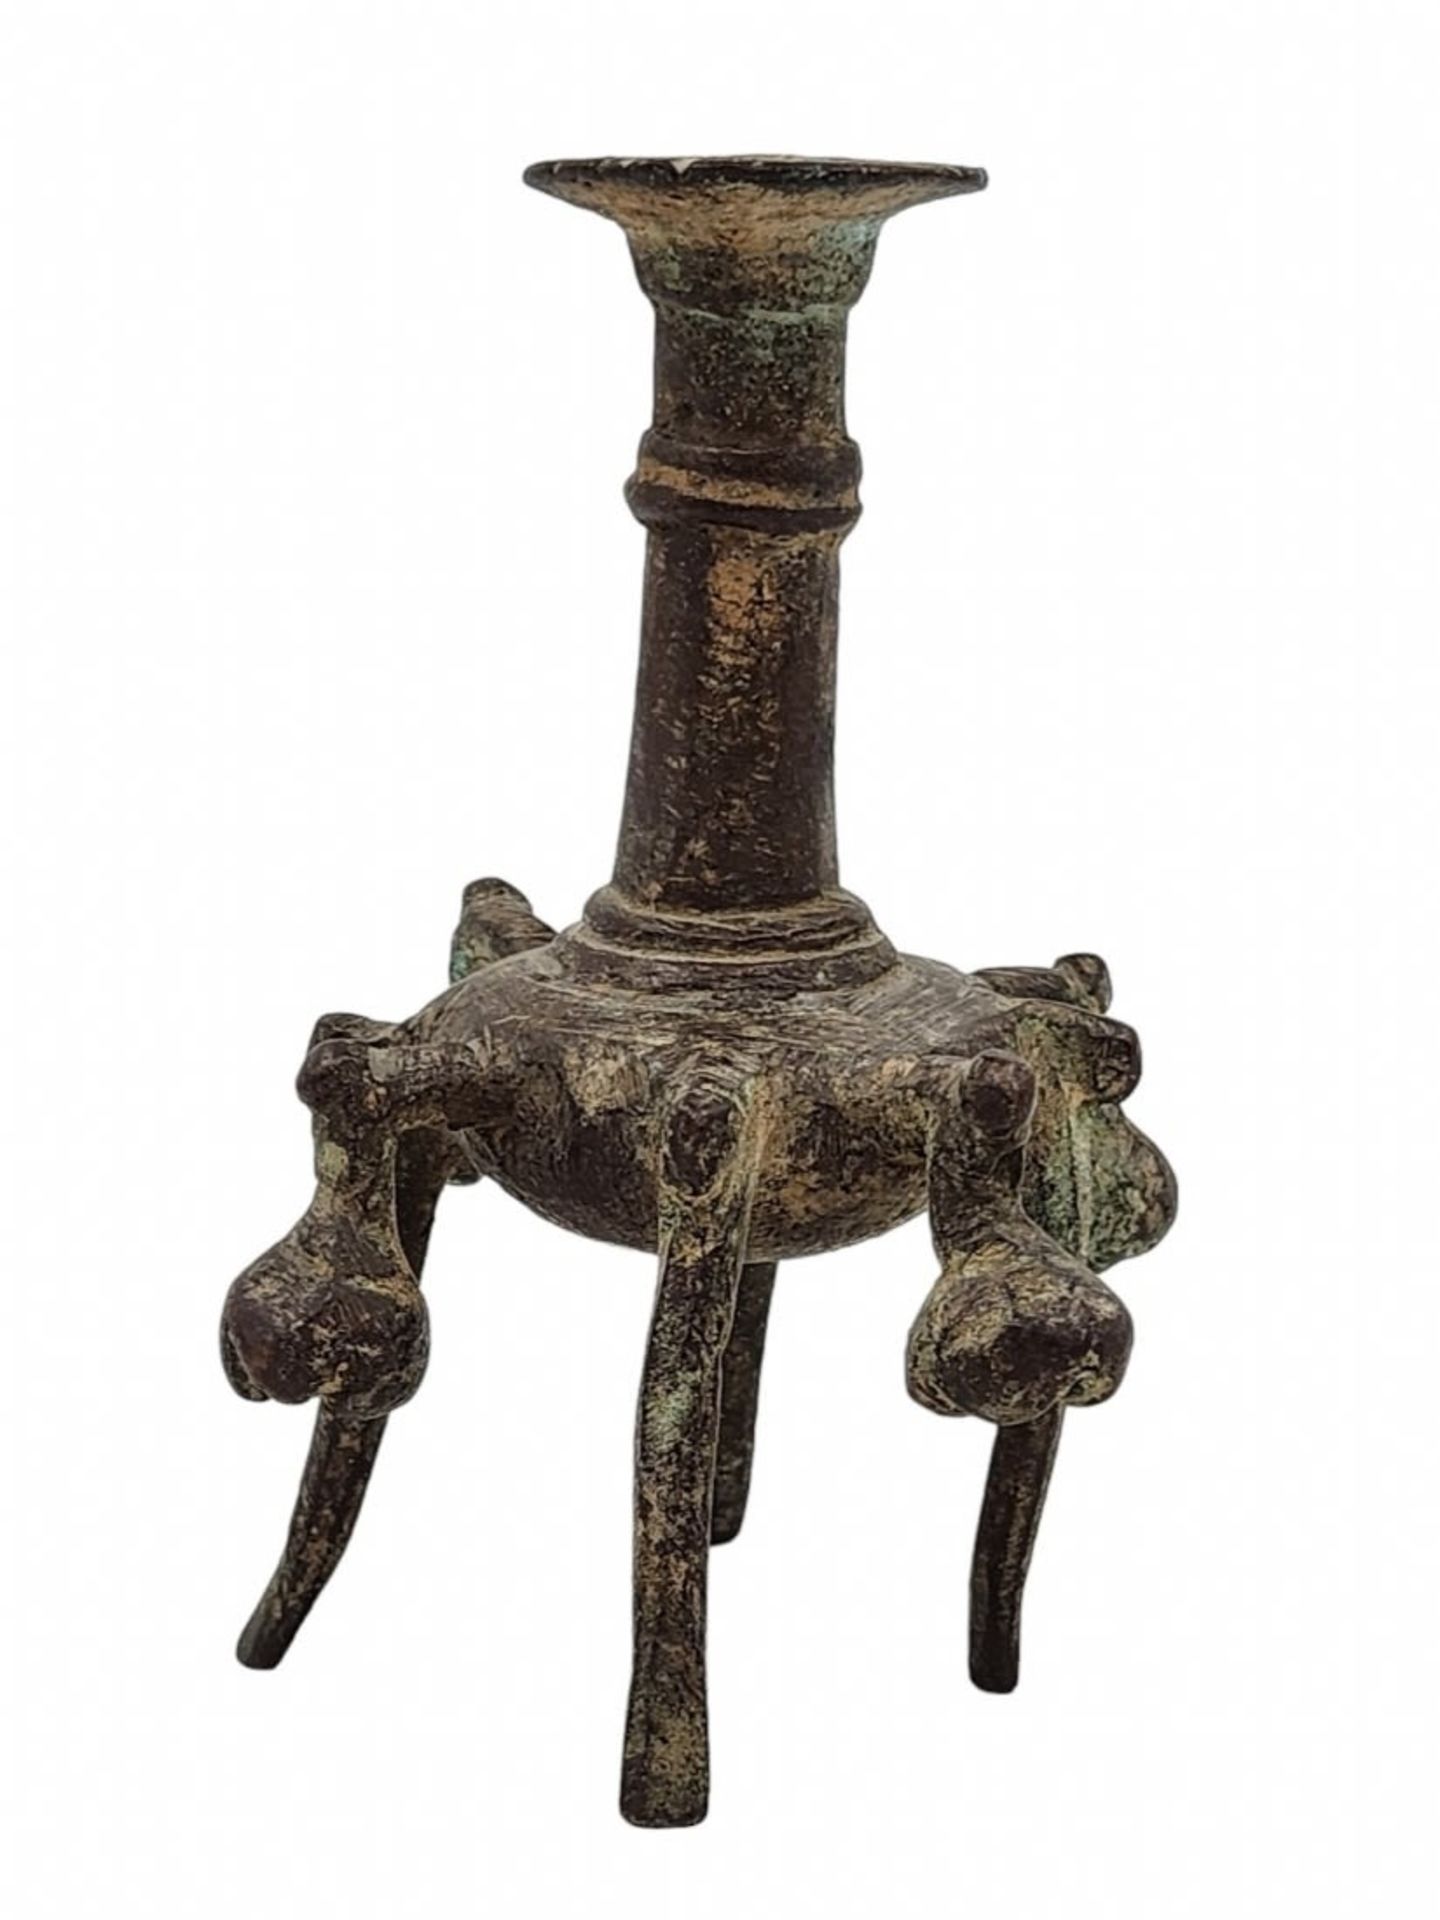 An antique Indian vessel for cosmetics, made of bronze, 18th century, Height: 14 cm, Width: 10 cm. - Image 2 of 5